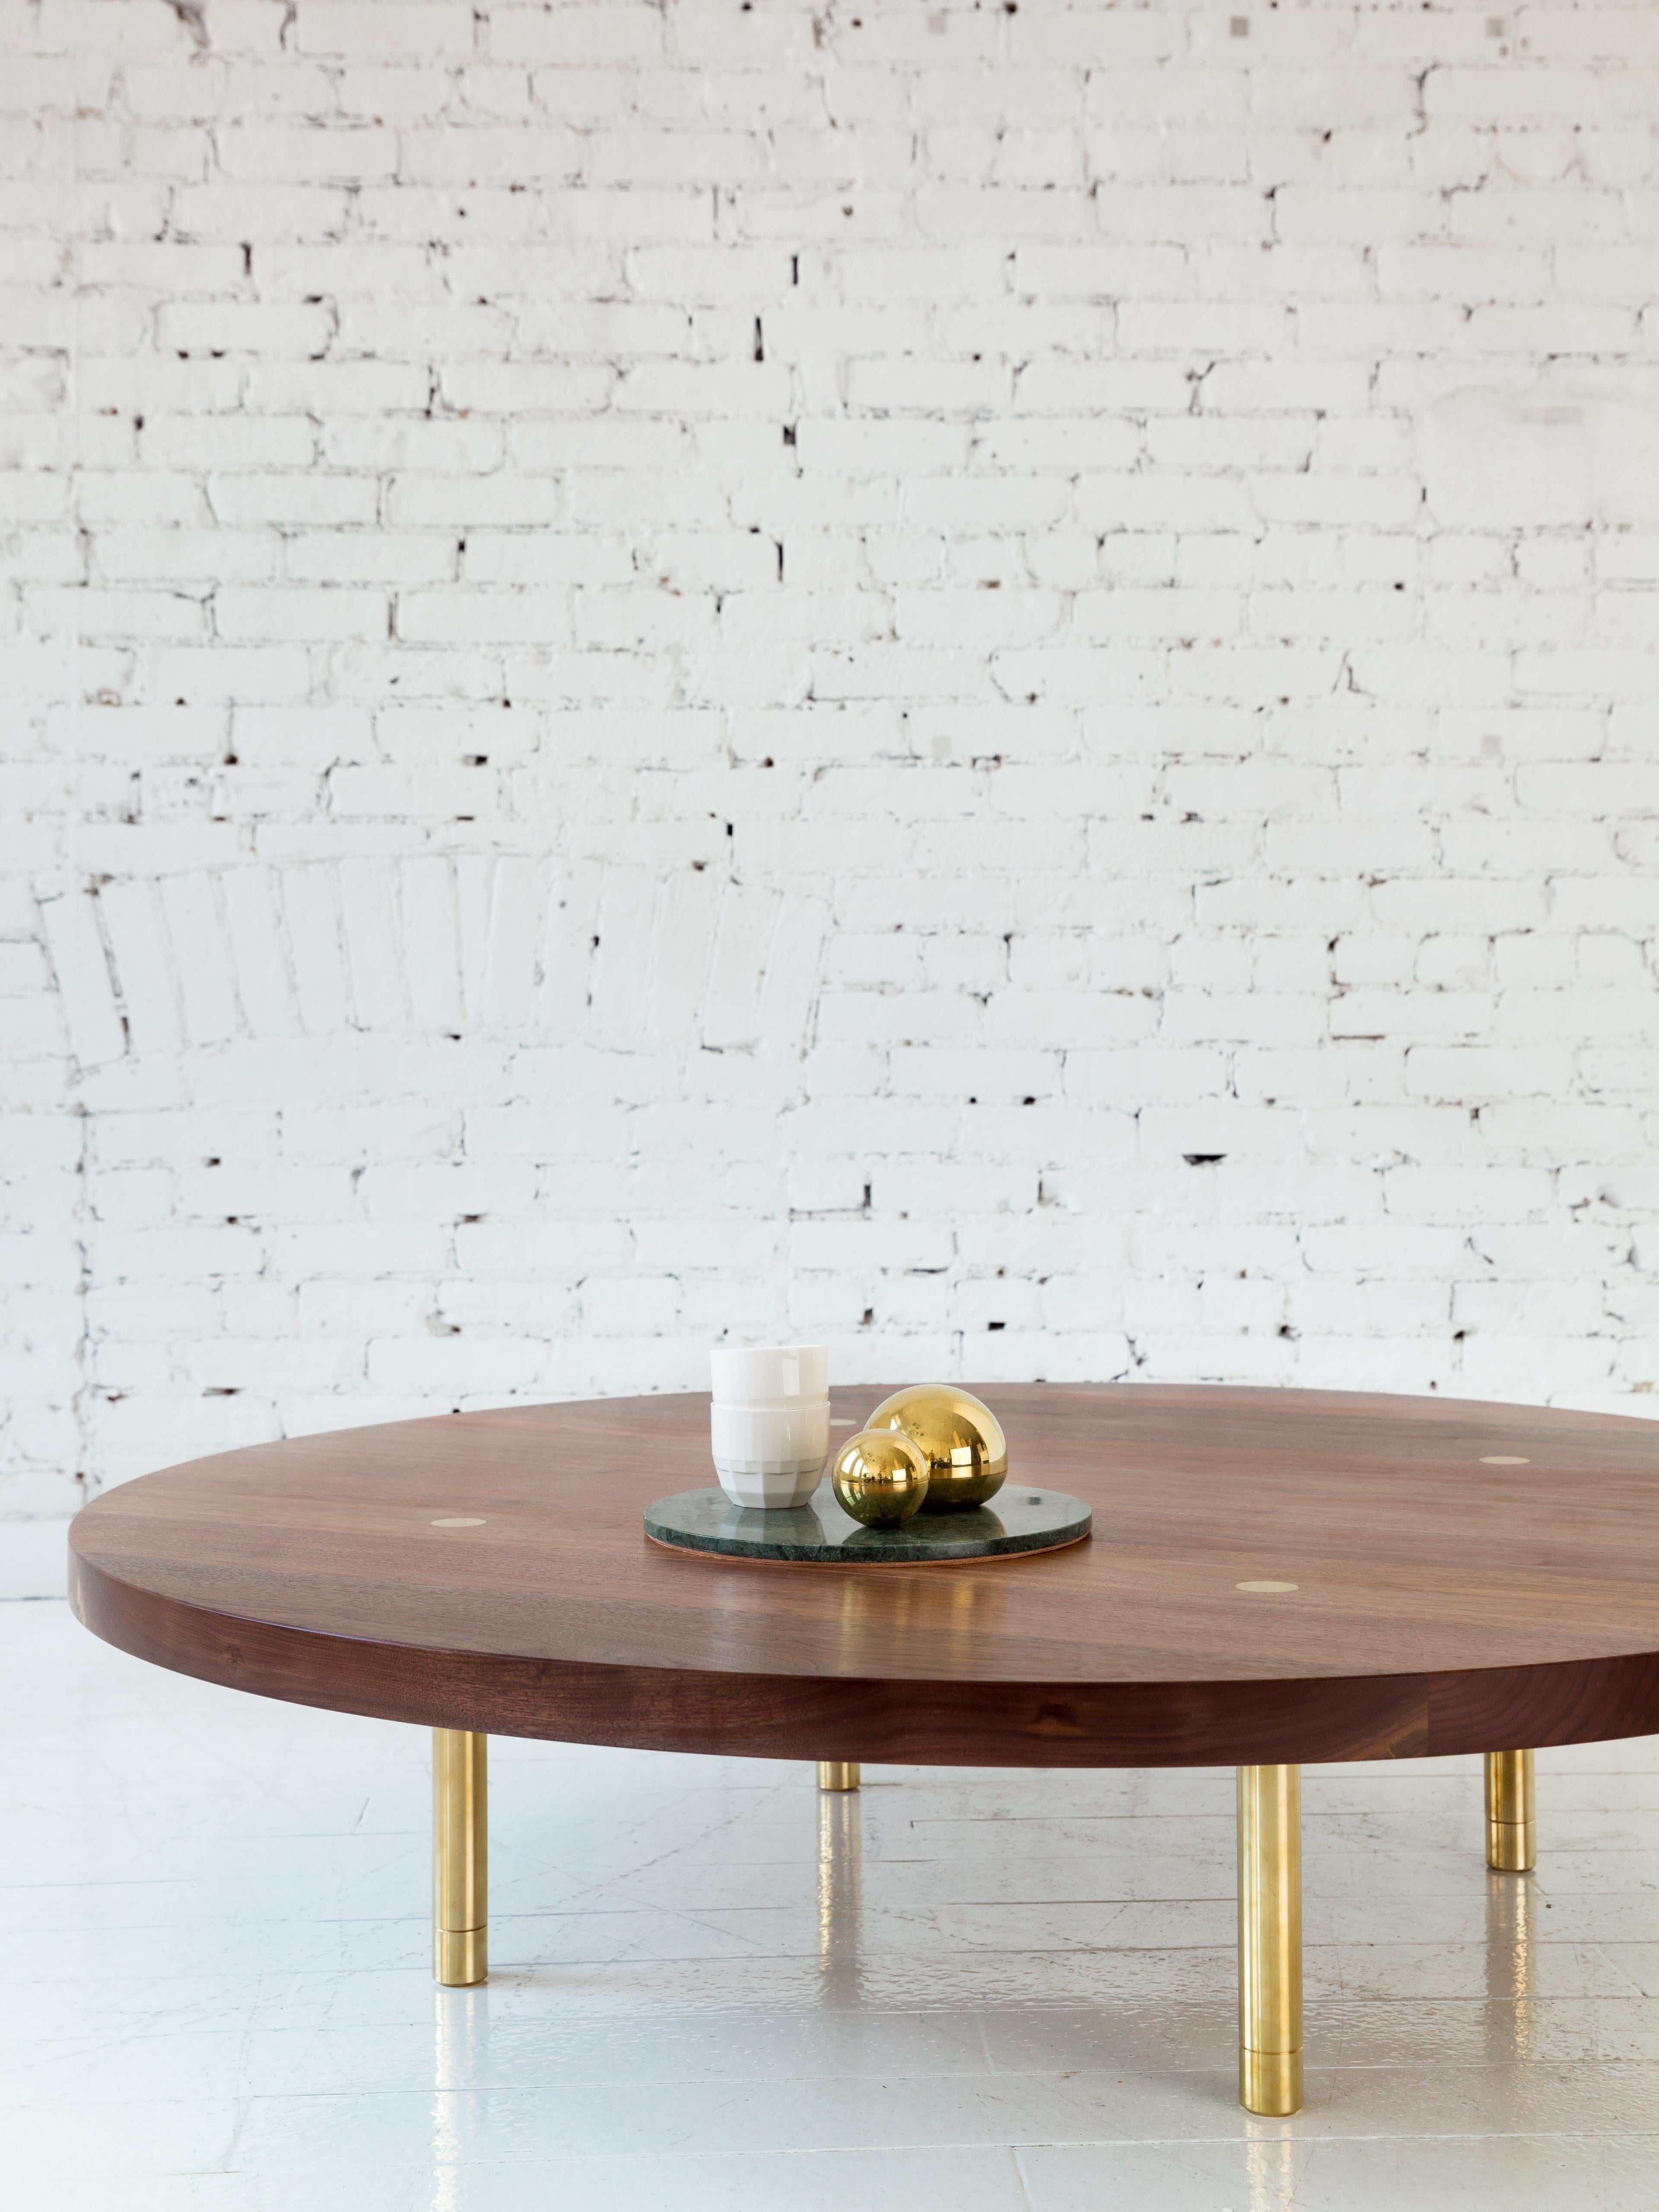 This contemporary, minimal wooden coffee table features a hardwood top and solid brass legs with our signature tenon detail and precision machined leveling feet.

Shown here with a walnut circular top and burnished brass legs.  Made to order in